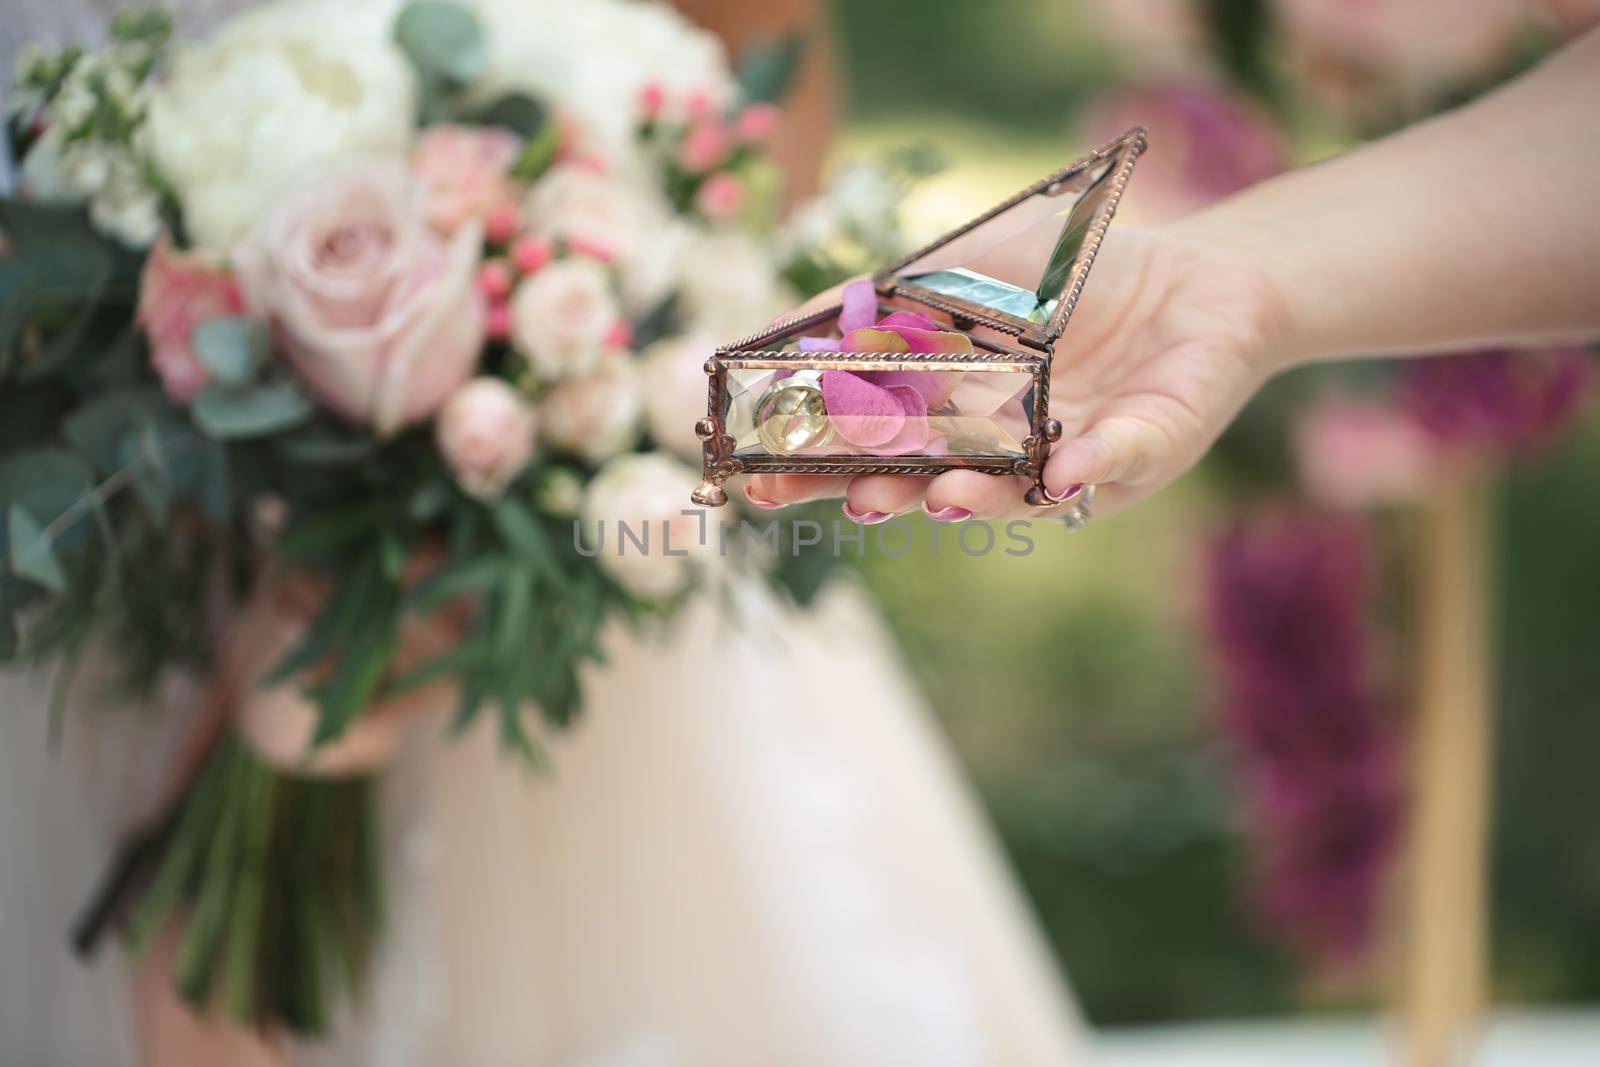 Gold wedding rings in a glass box with rose petals in women 's hands. by StudioPeace